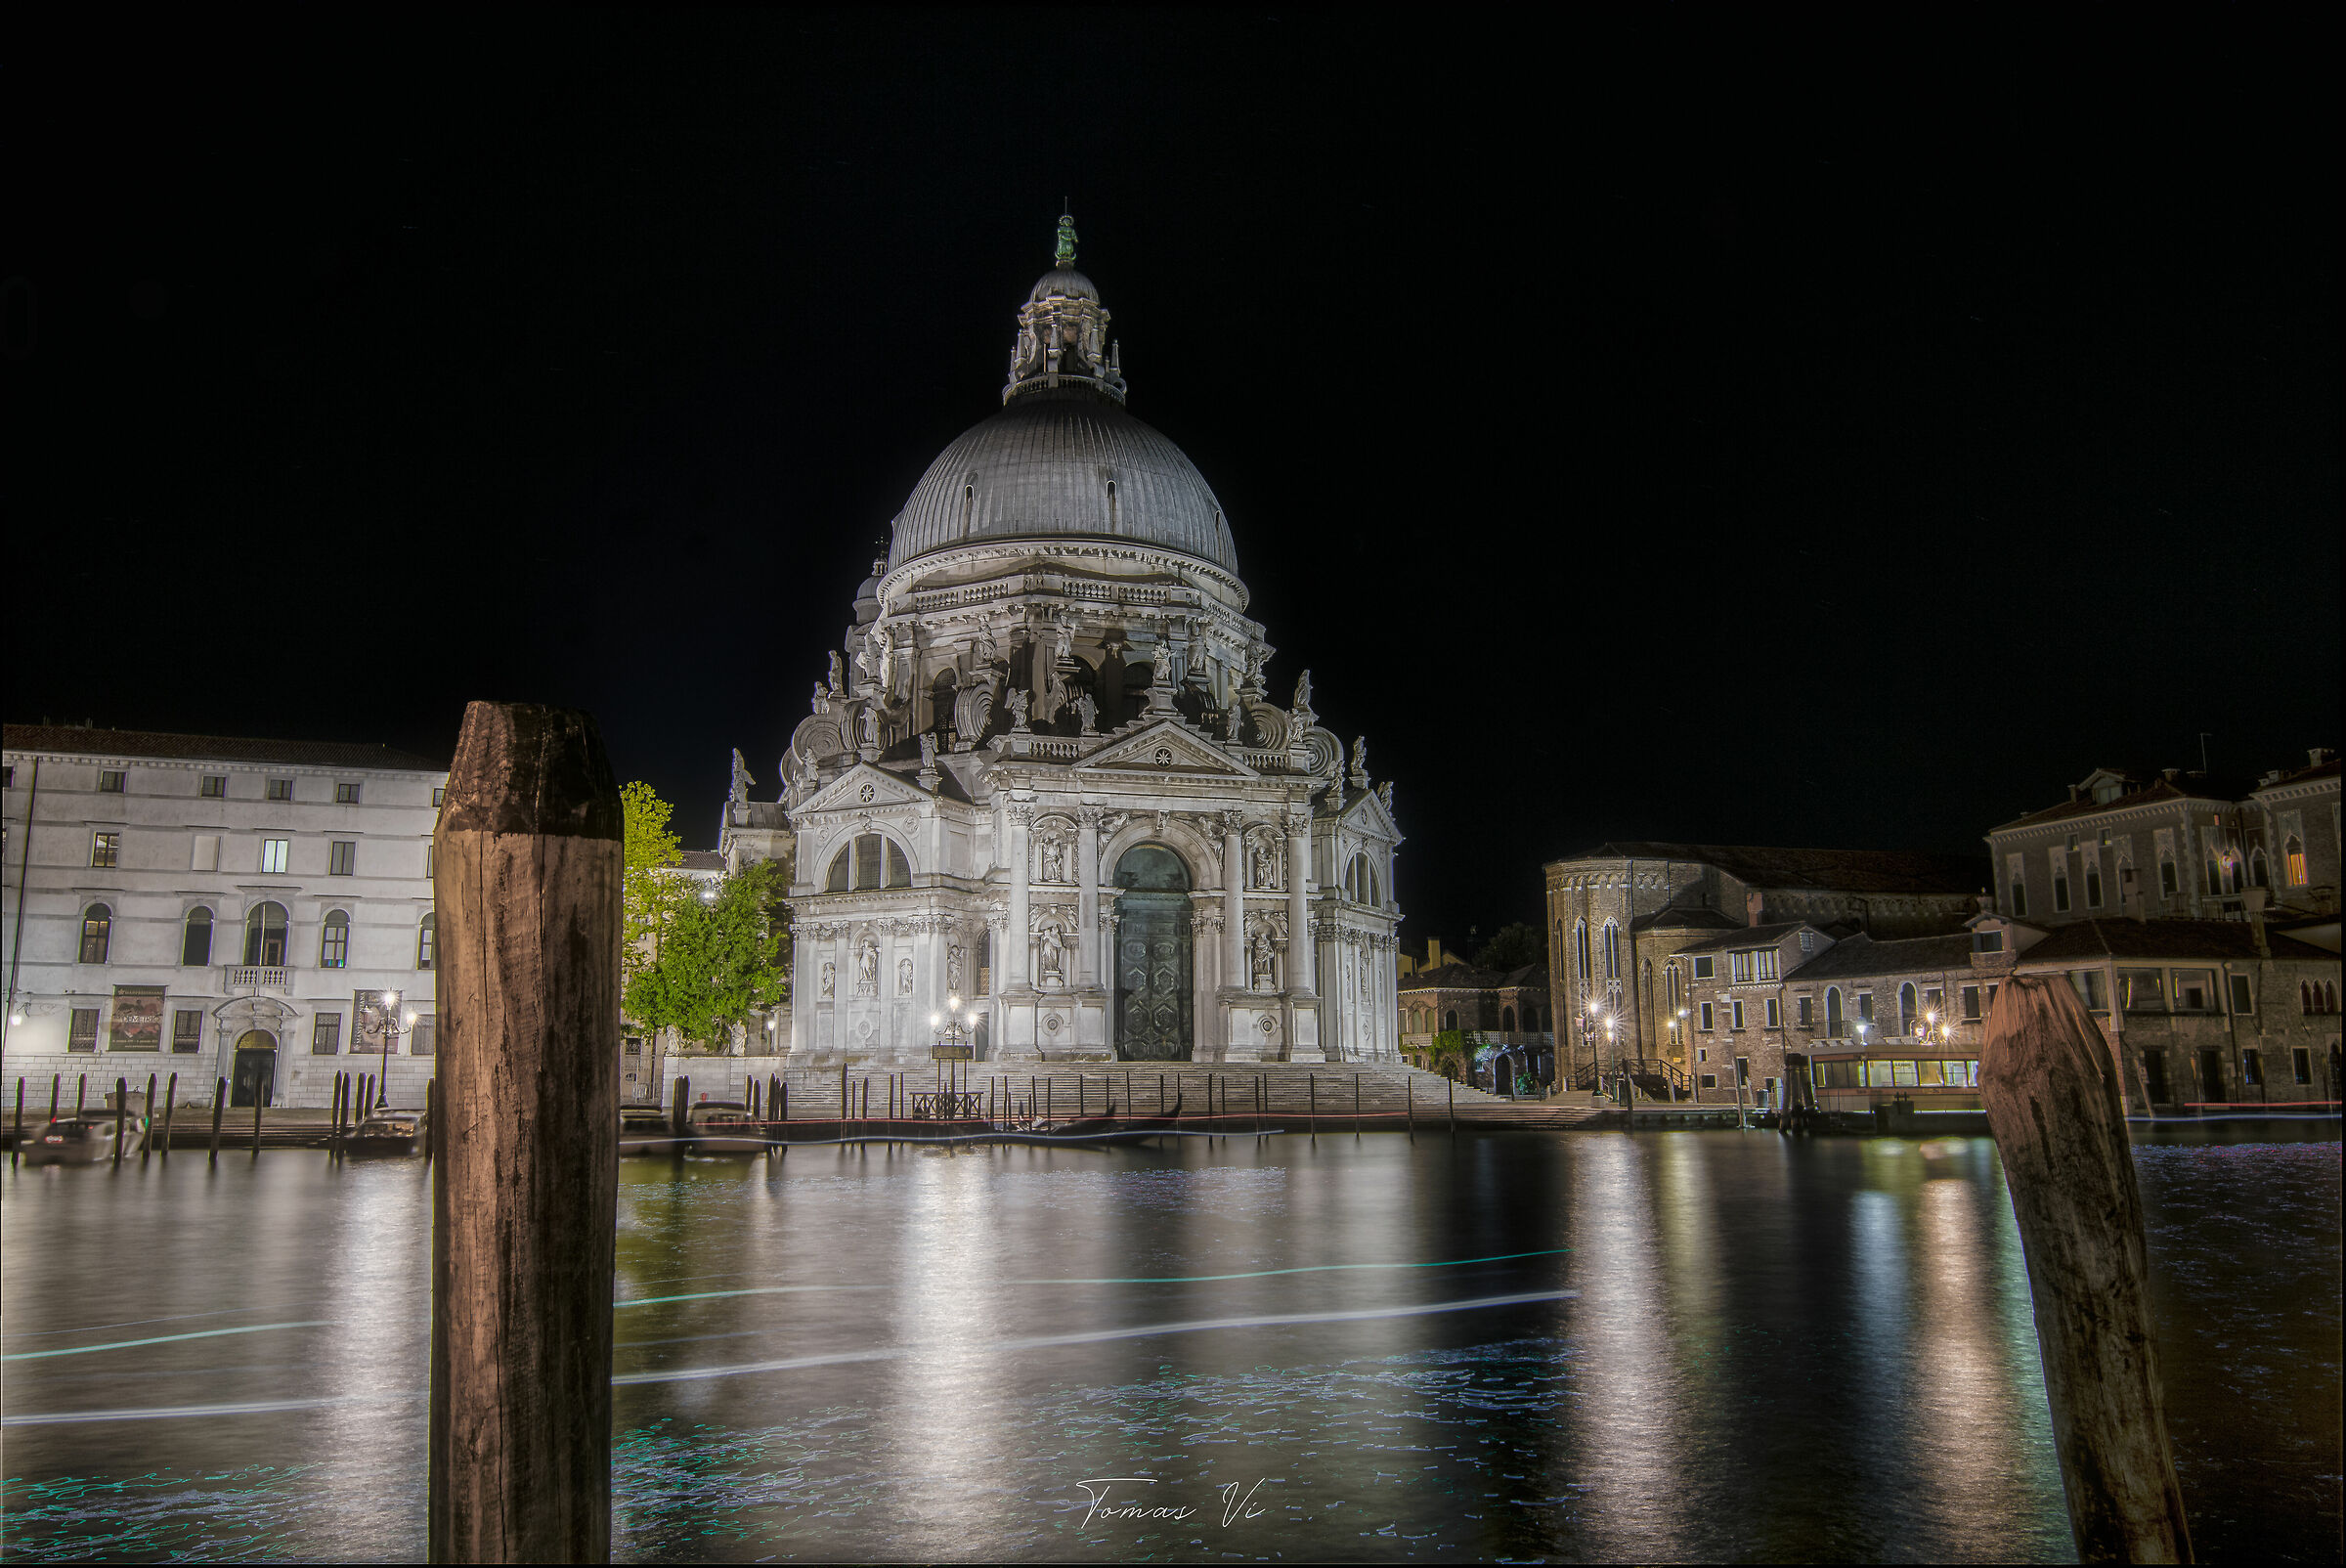 Church from Our Lady of Health, Venice at night ...